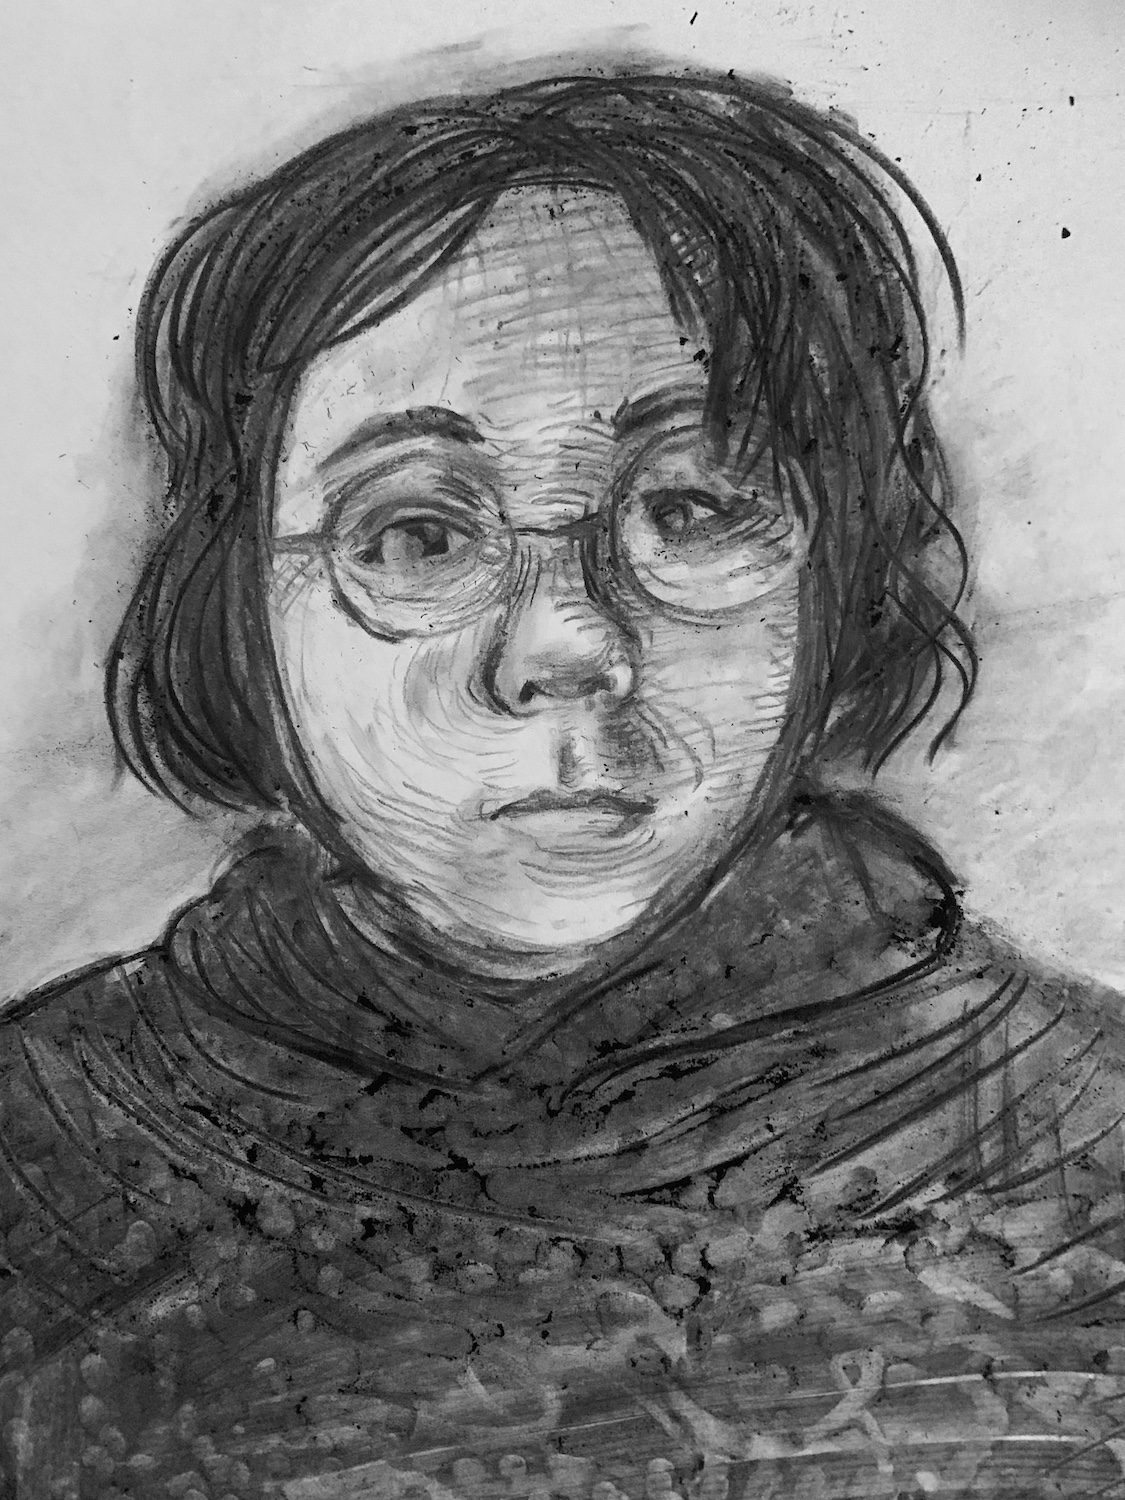 thumbnail of Myself by Kelly Nguyen. Medium: Charcoal on paper. Size 17 x 14 inches Date 2020